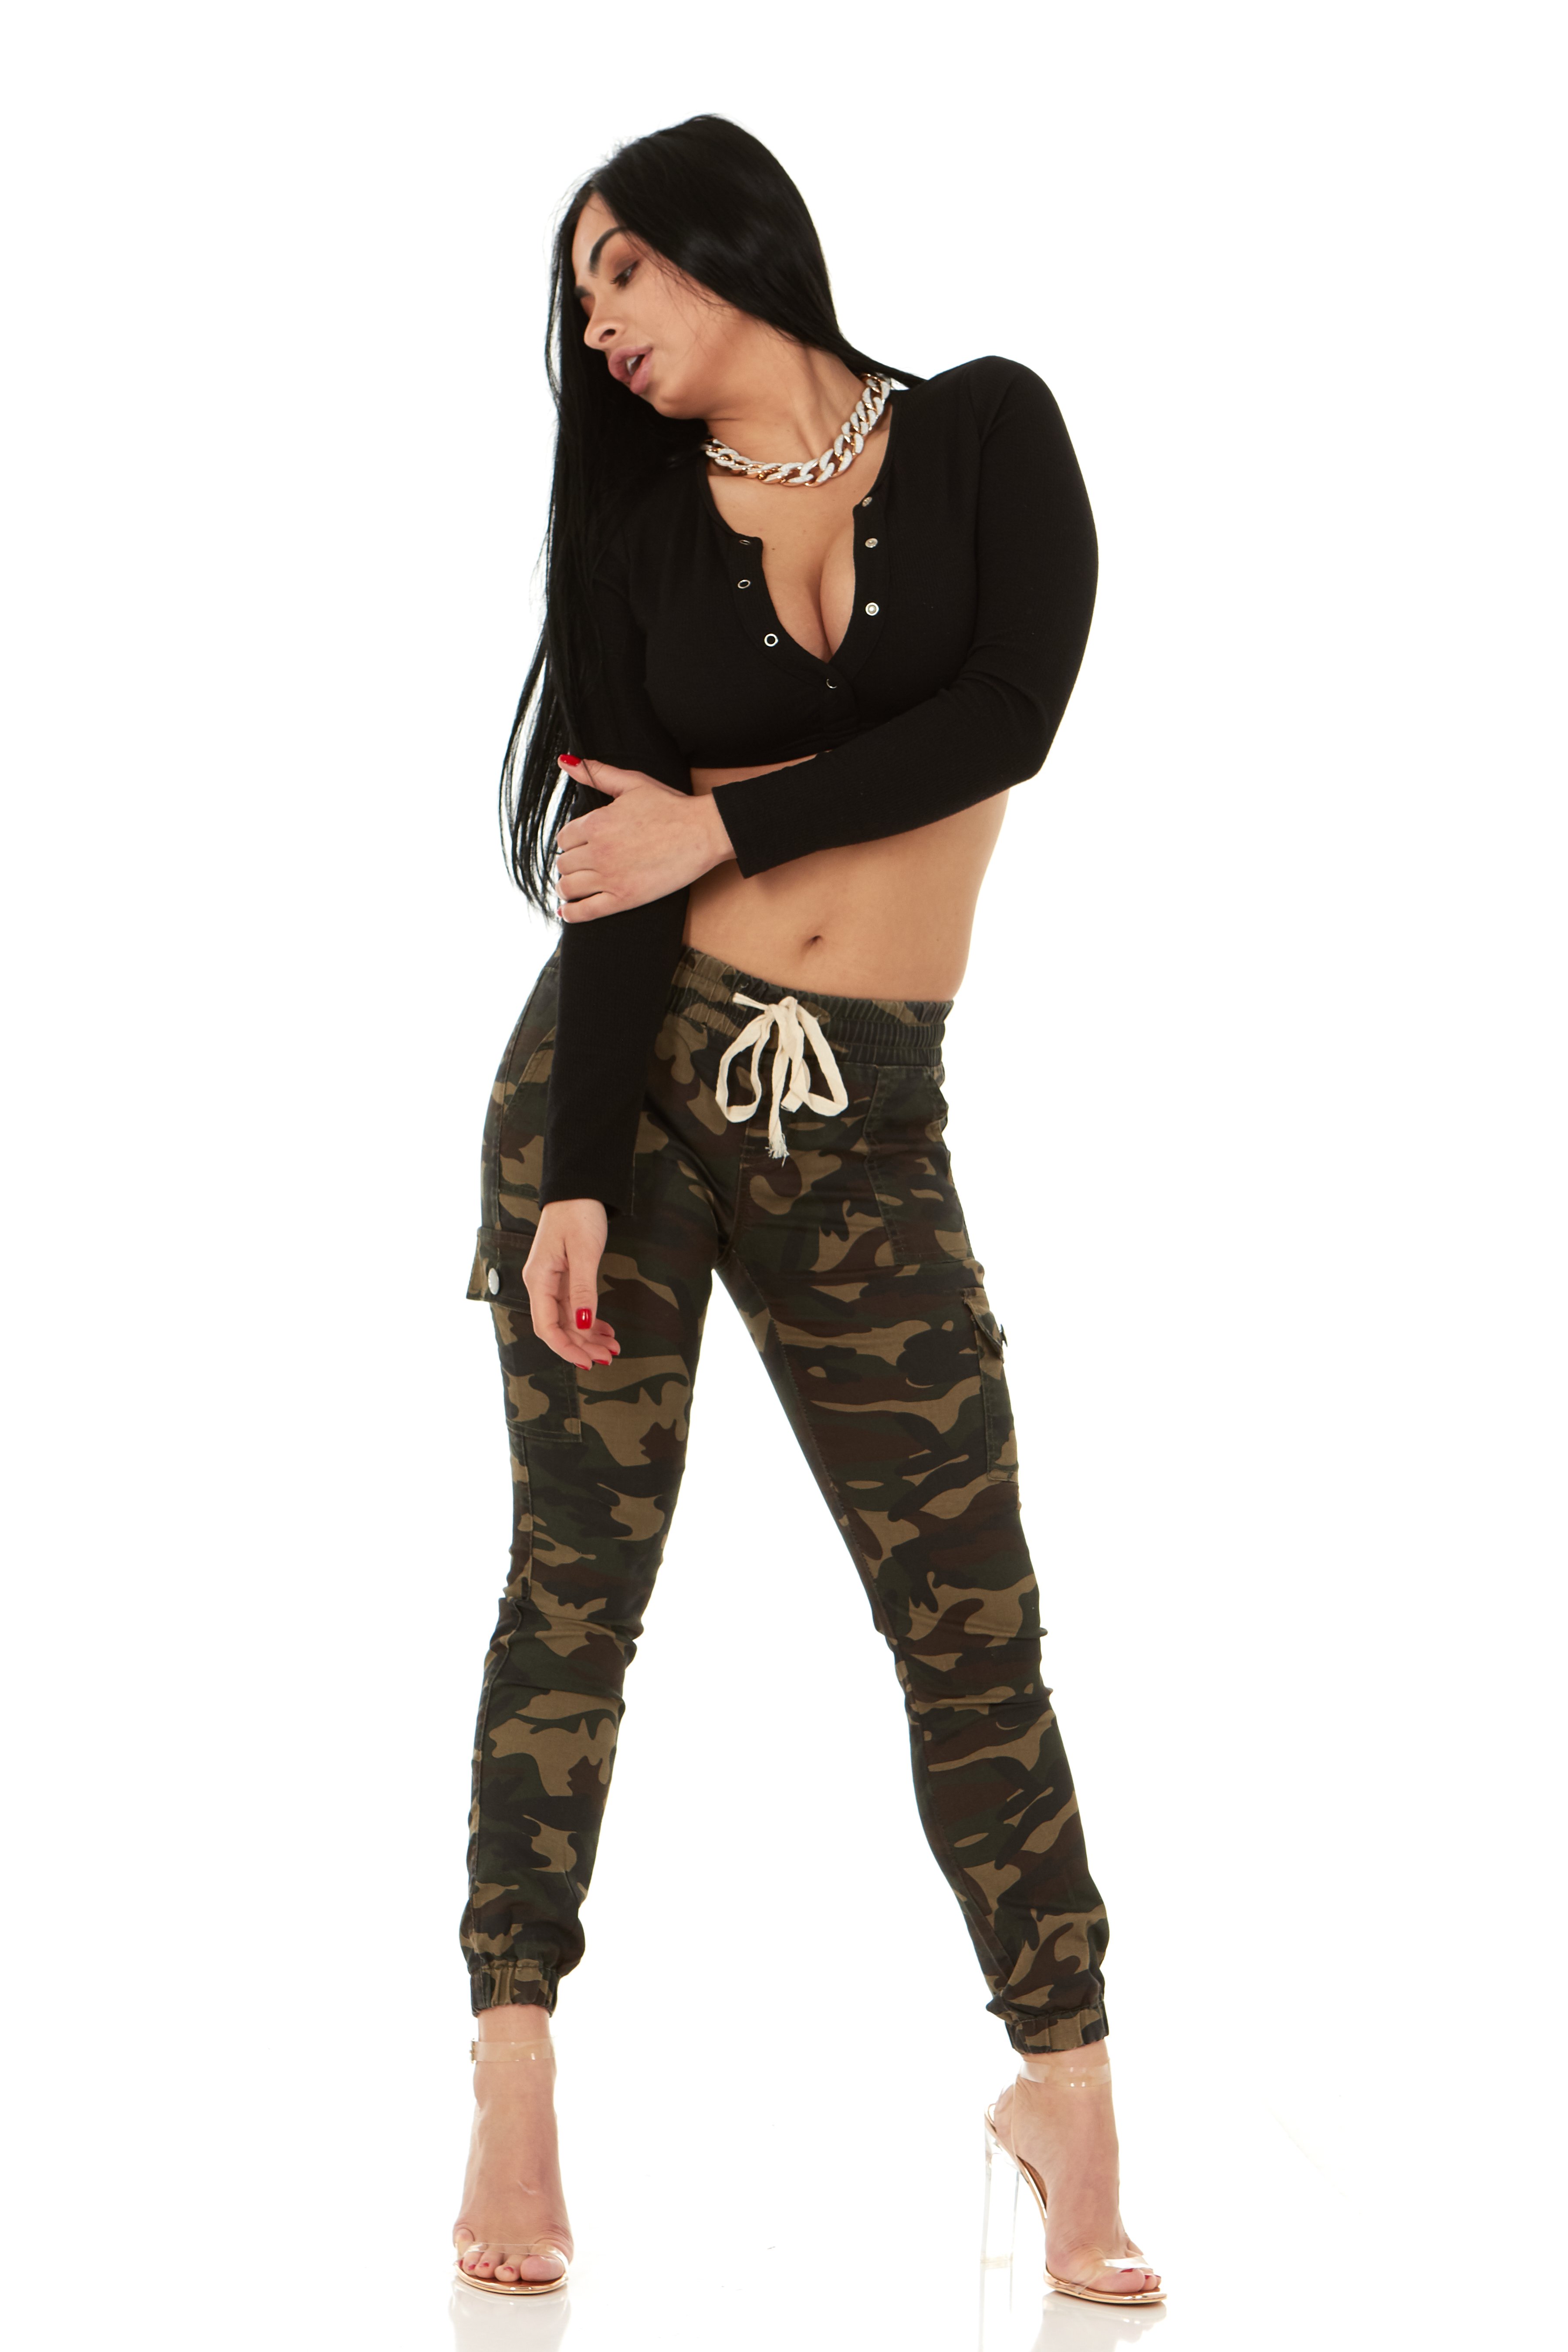 VIP CG  Jeans Collection Cargo High Waisted Jogger Skinny Drawstring Pants